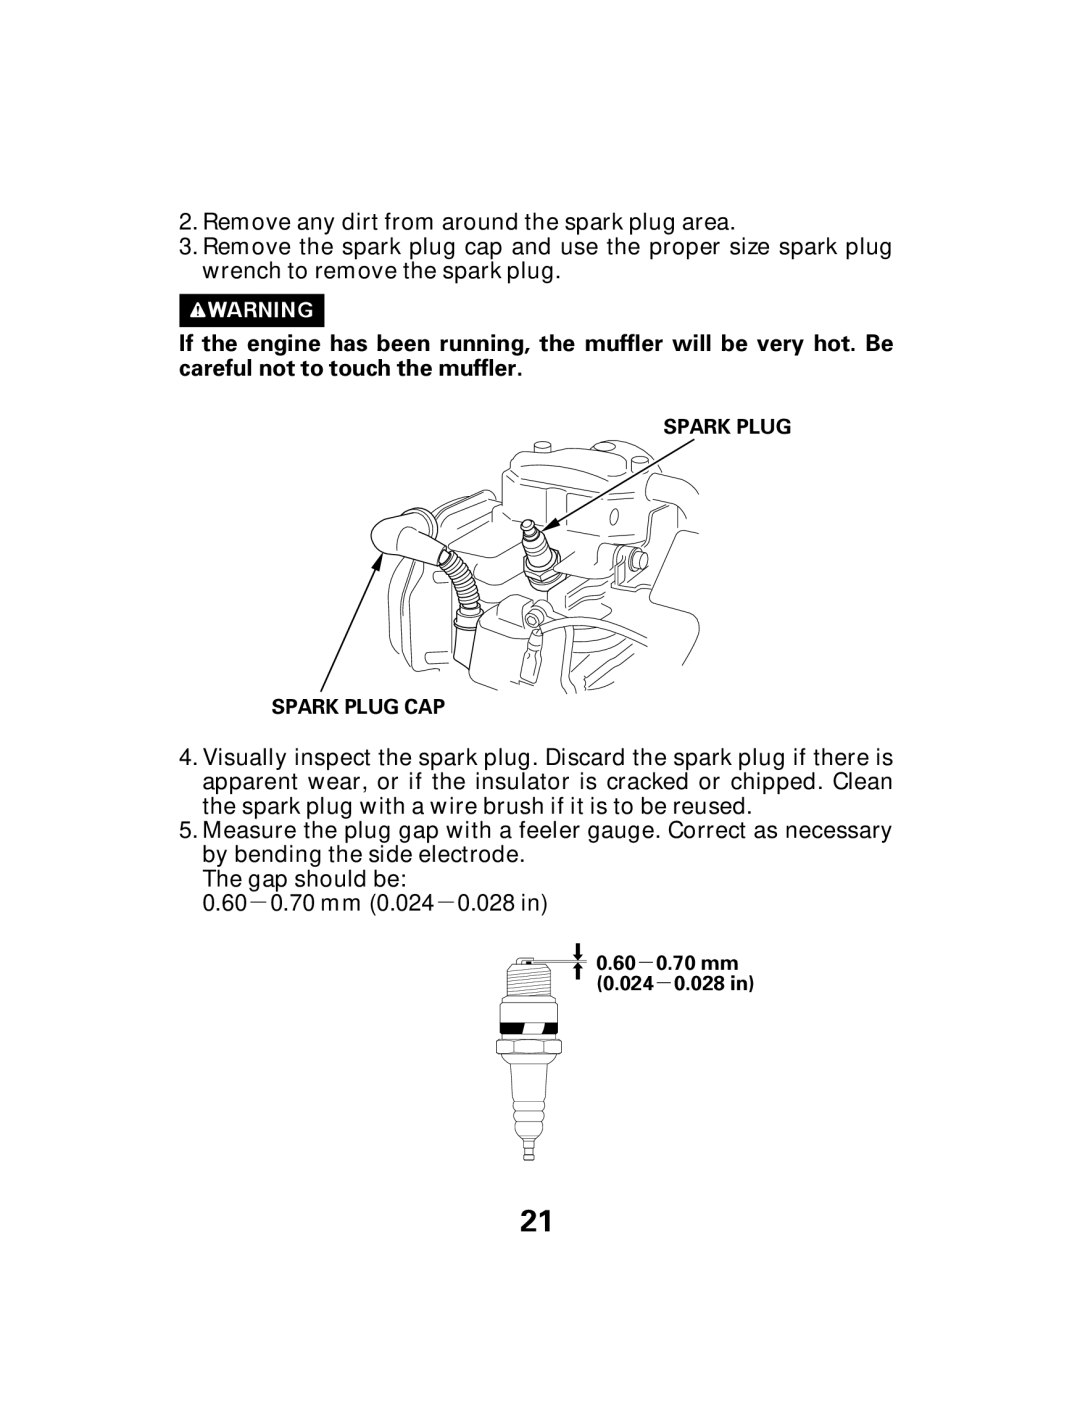 Honda Power Equipment GX25 owner manual Remove any dirt from around the spark plug area 